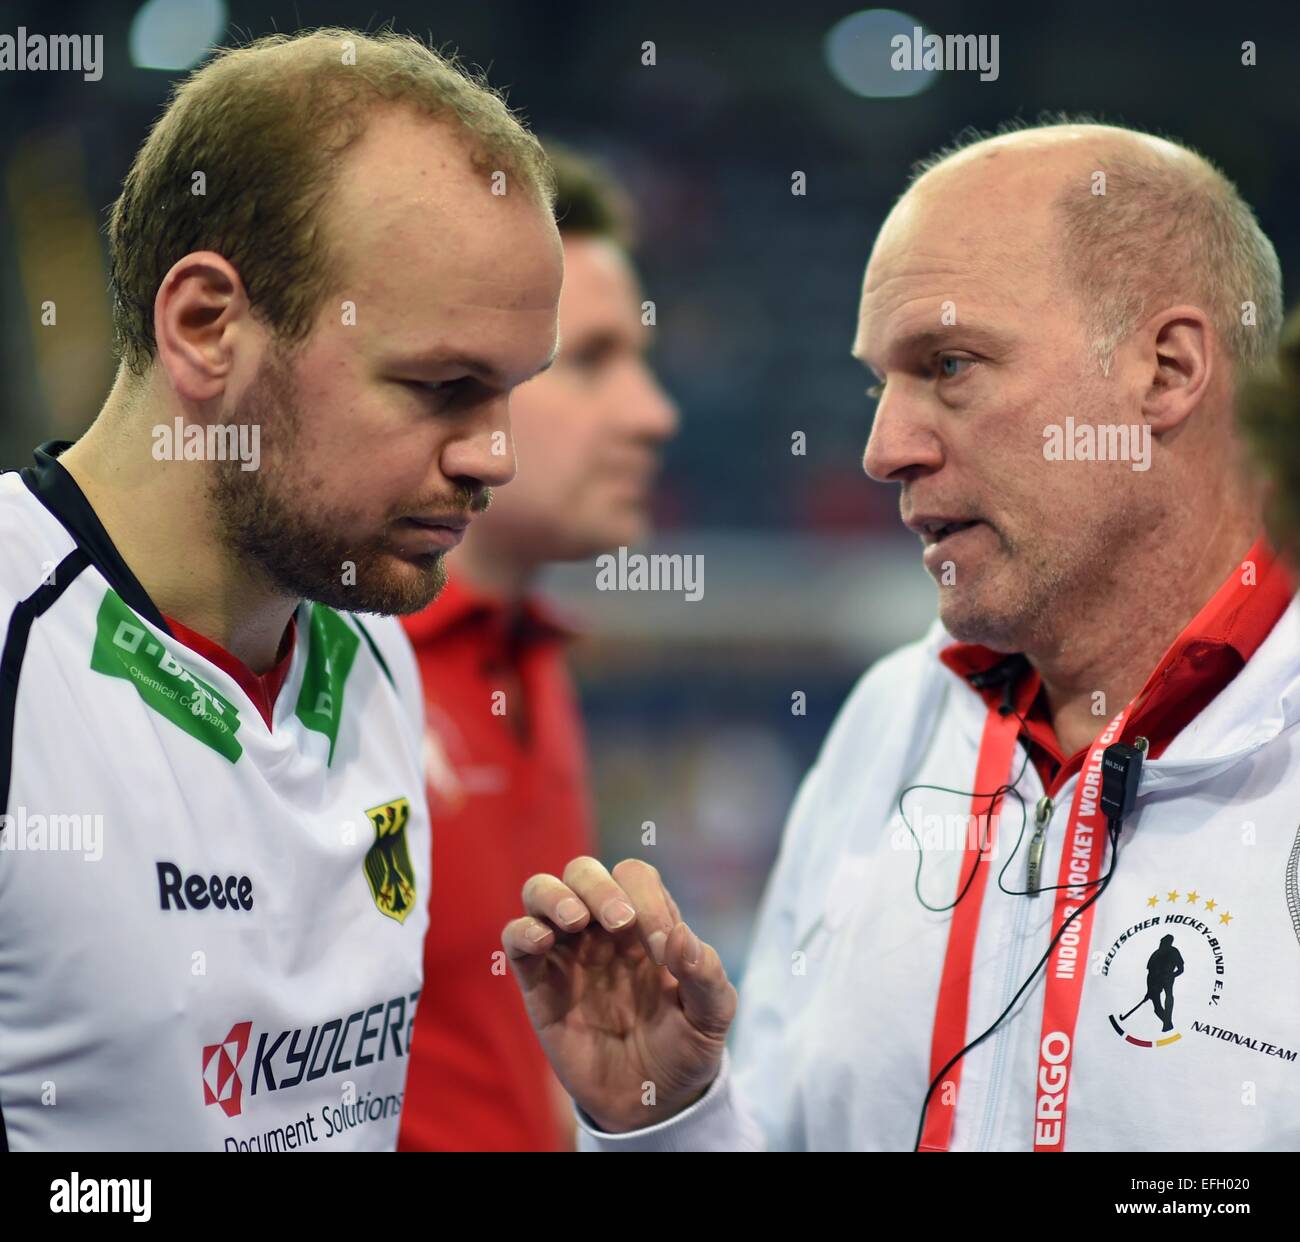 Leipzig, Germany. 04th Feb, 2015. German coach Markus Weise (R) and Thilo Stralkowski (L) analyze the game during the Men's Group A match of the Indoor Hockey World Cup in Leipzig, Germany, 04 February 2015. PHOTO: HENDRIK SCHMIDT/dpa/Alamy Live News Stock Photo